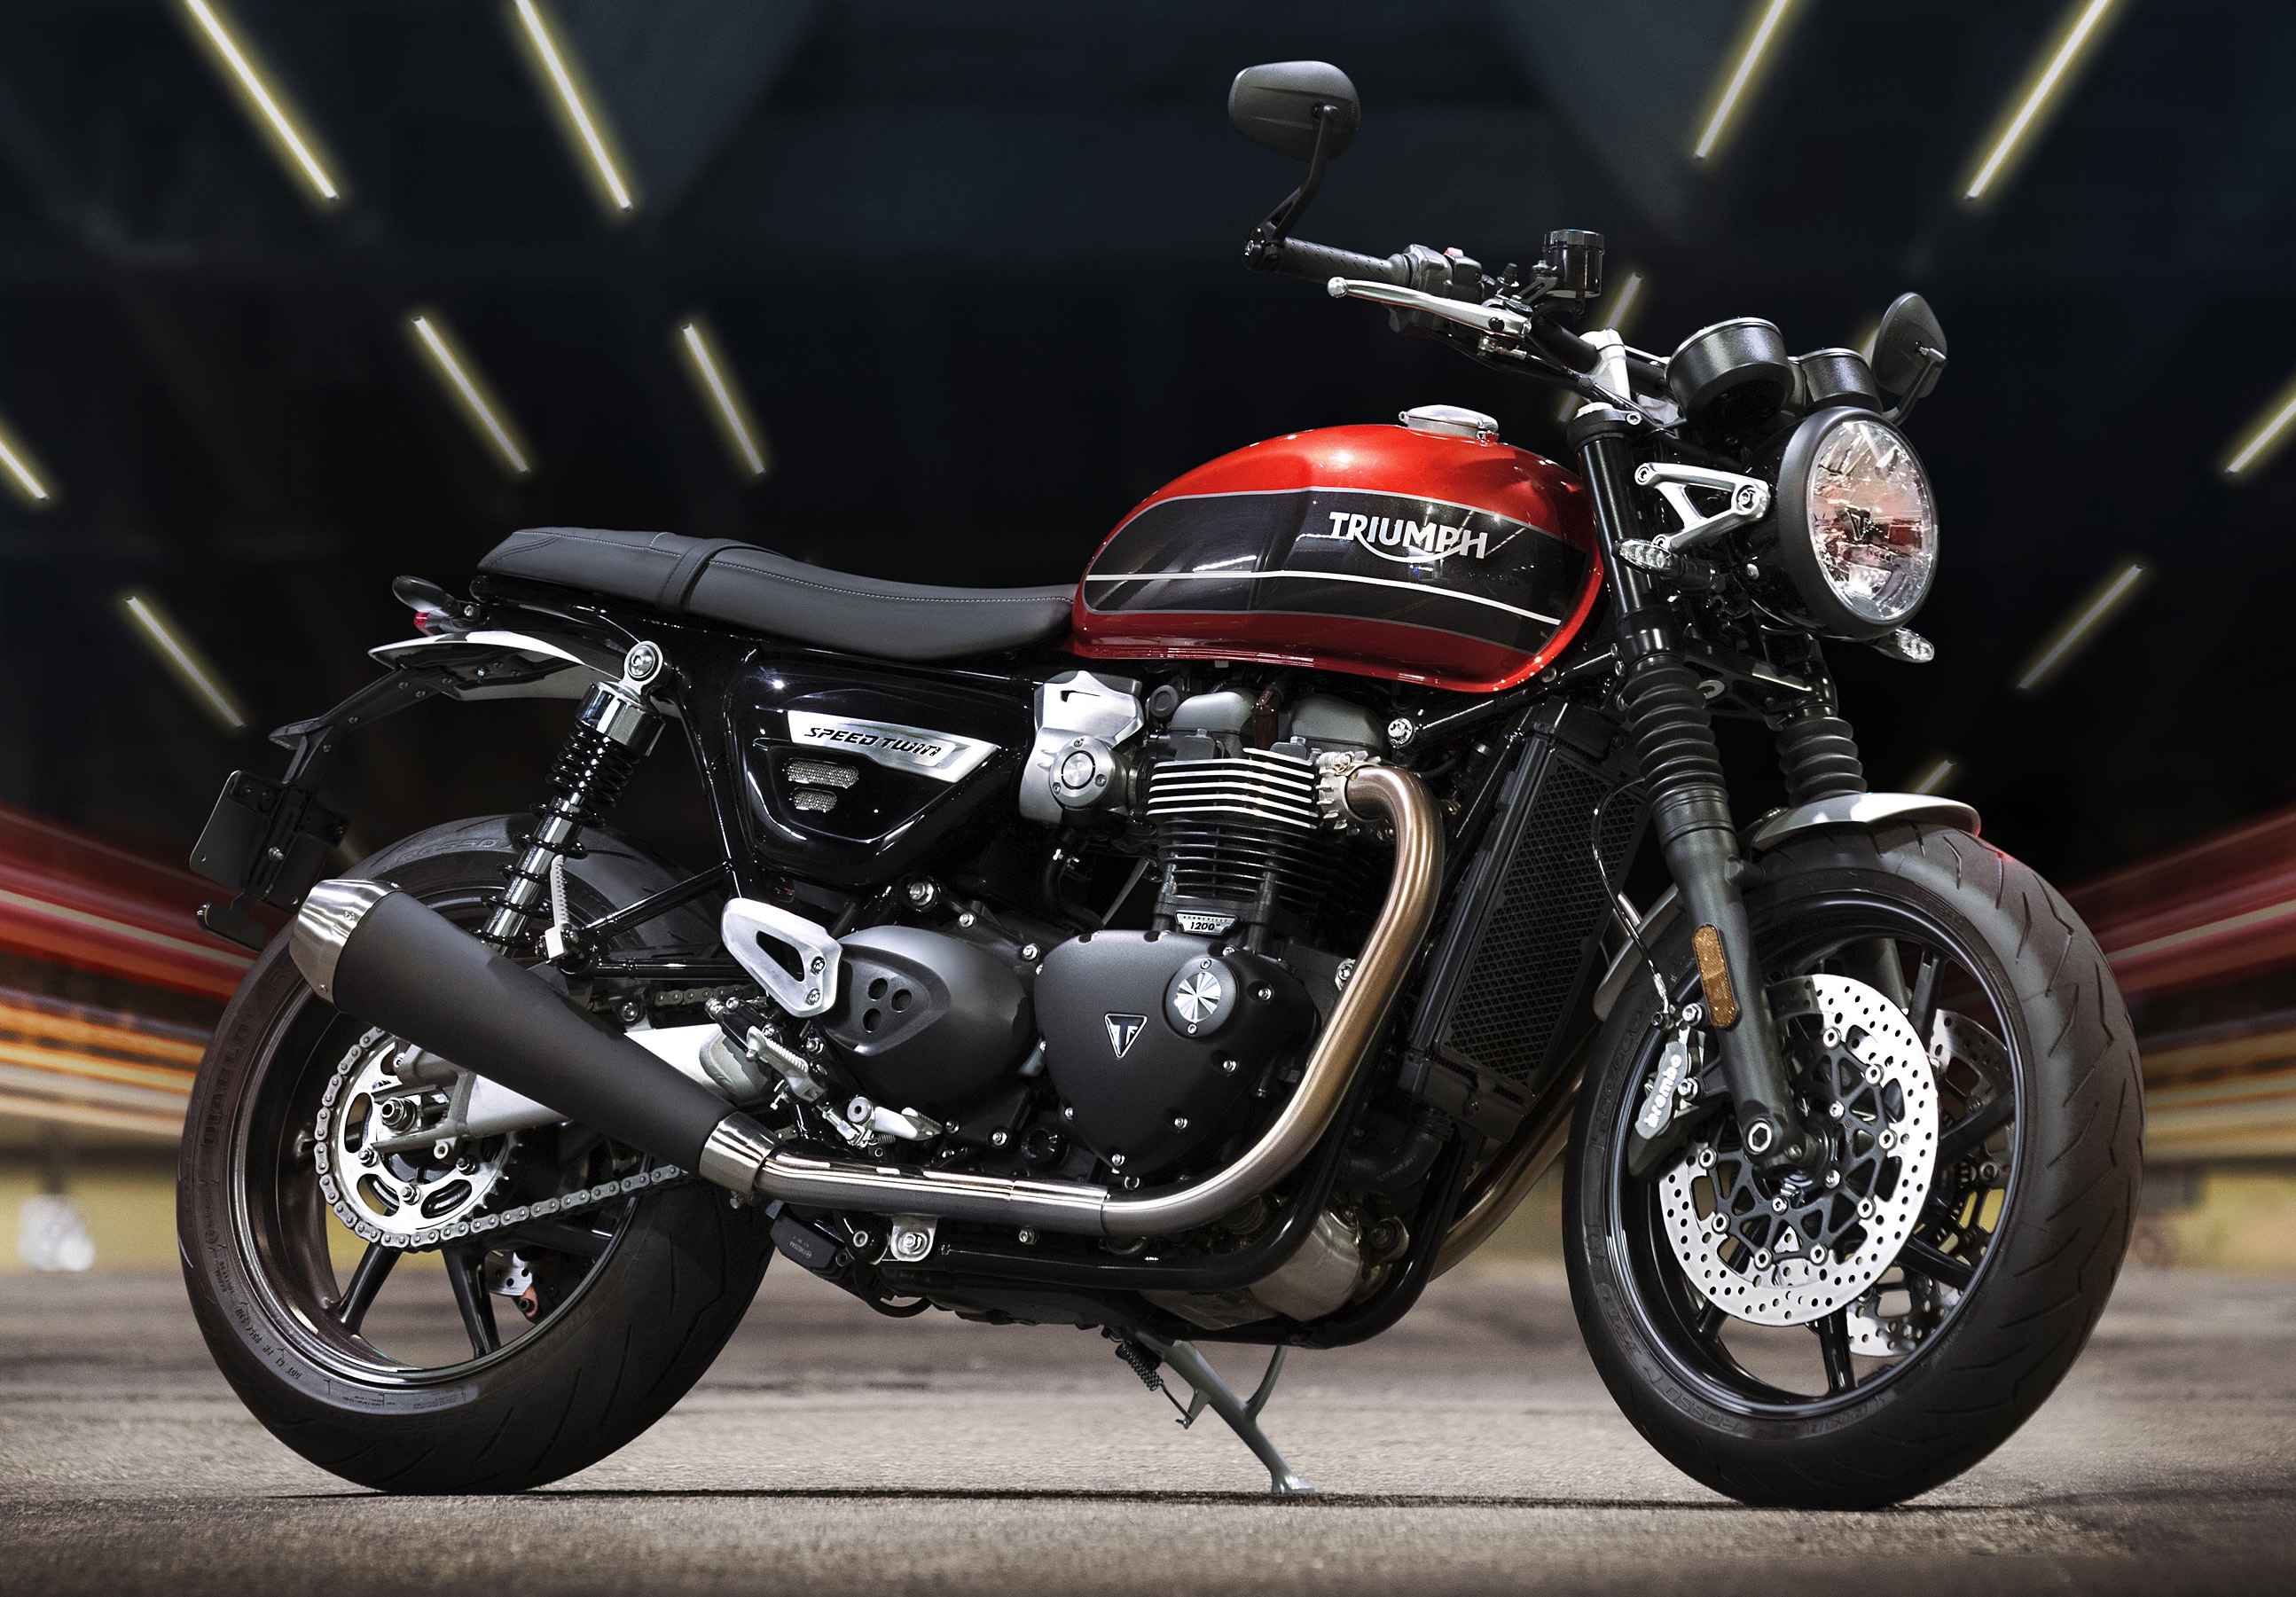 2019 Triumph Motorcycles Malaysia pricing updated new Triumph Speed